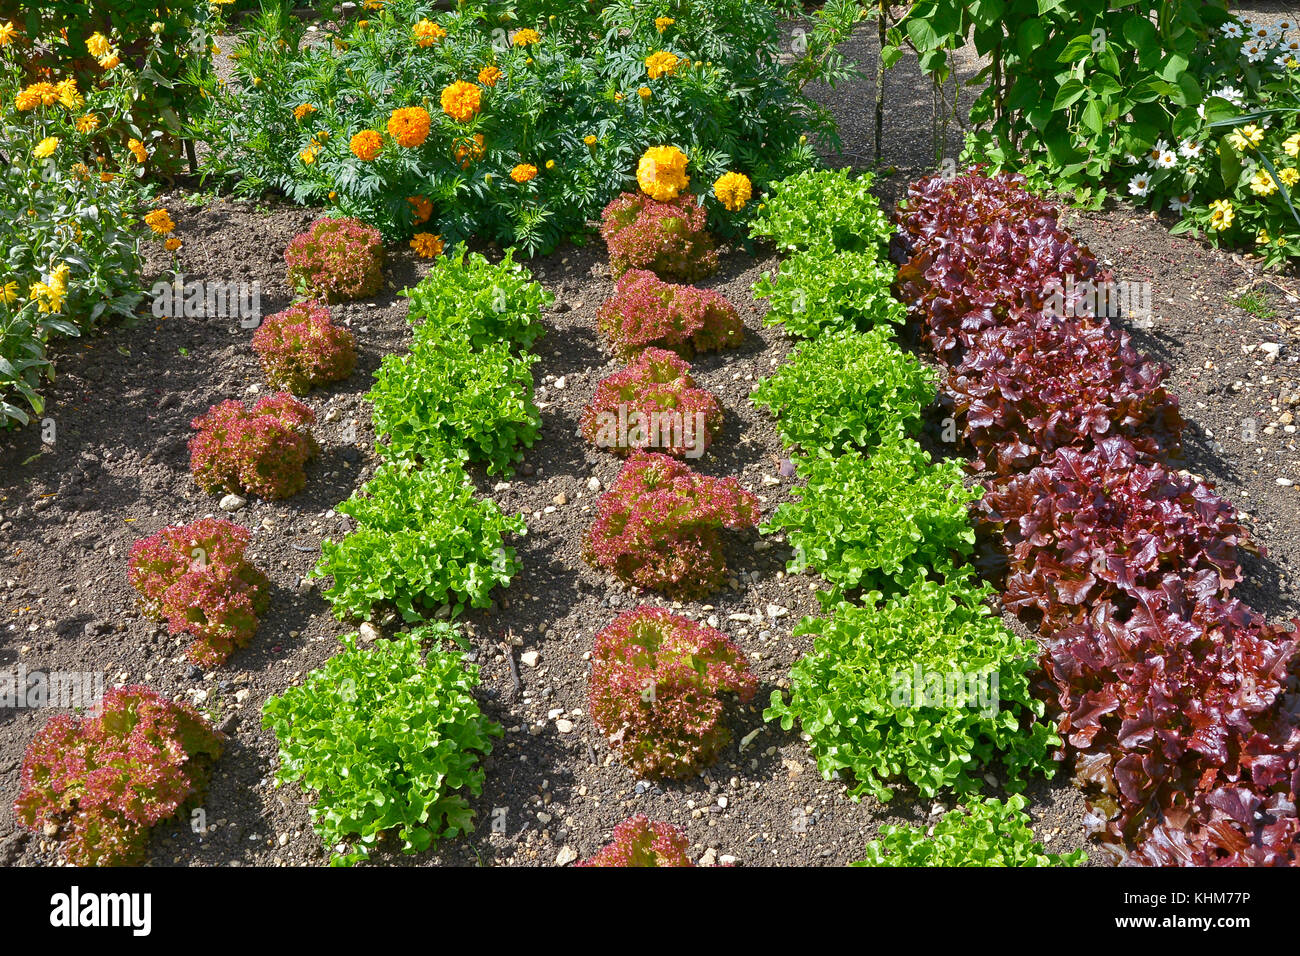 Varieties of Lettuce including Red Leaf Romaine growing in a vegetable garden with flowers Stock Photo